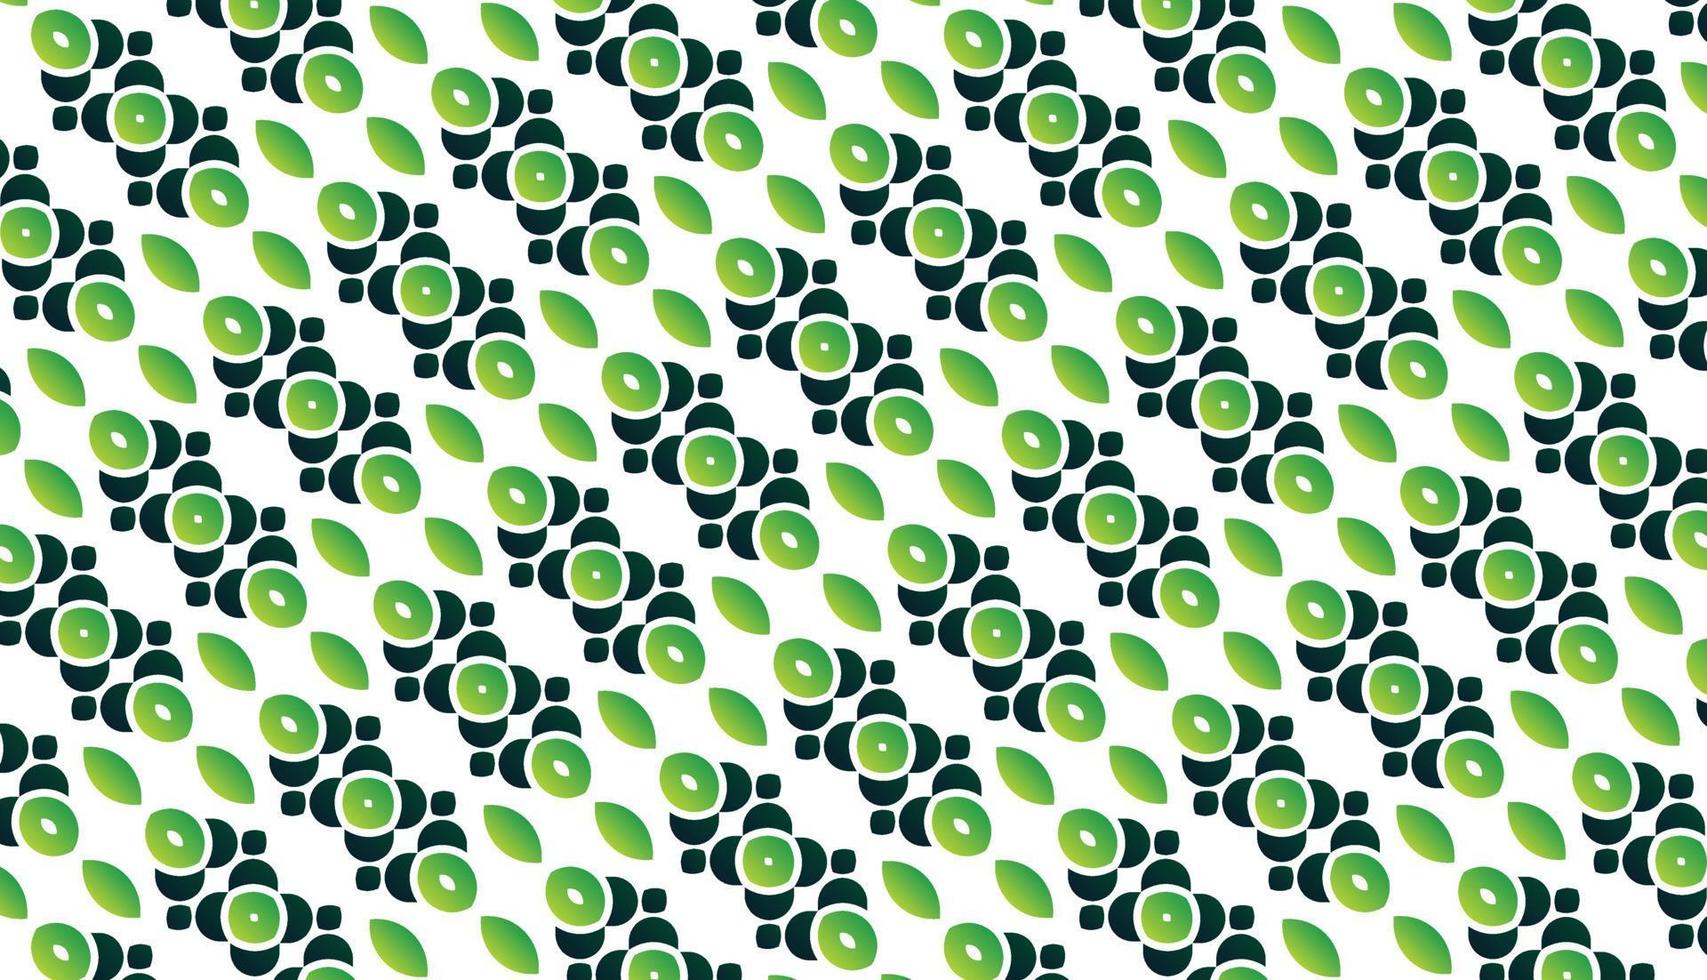 Green abstract geometric pattern design vector